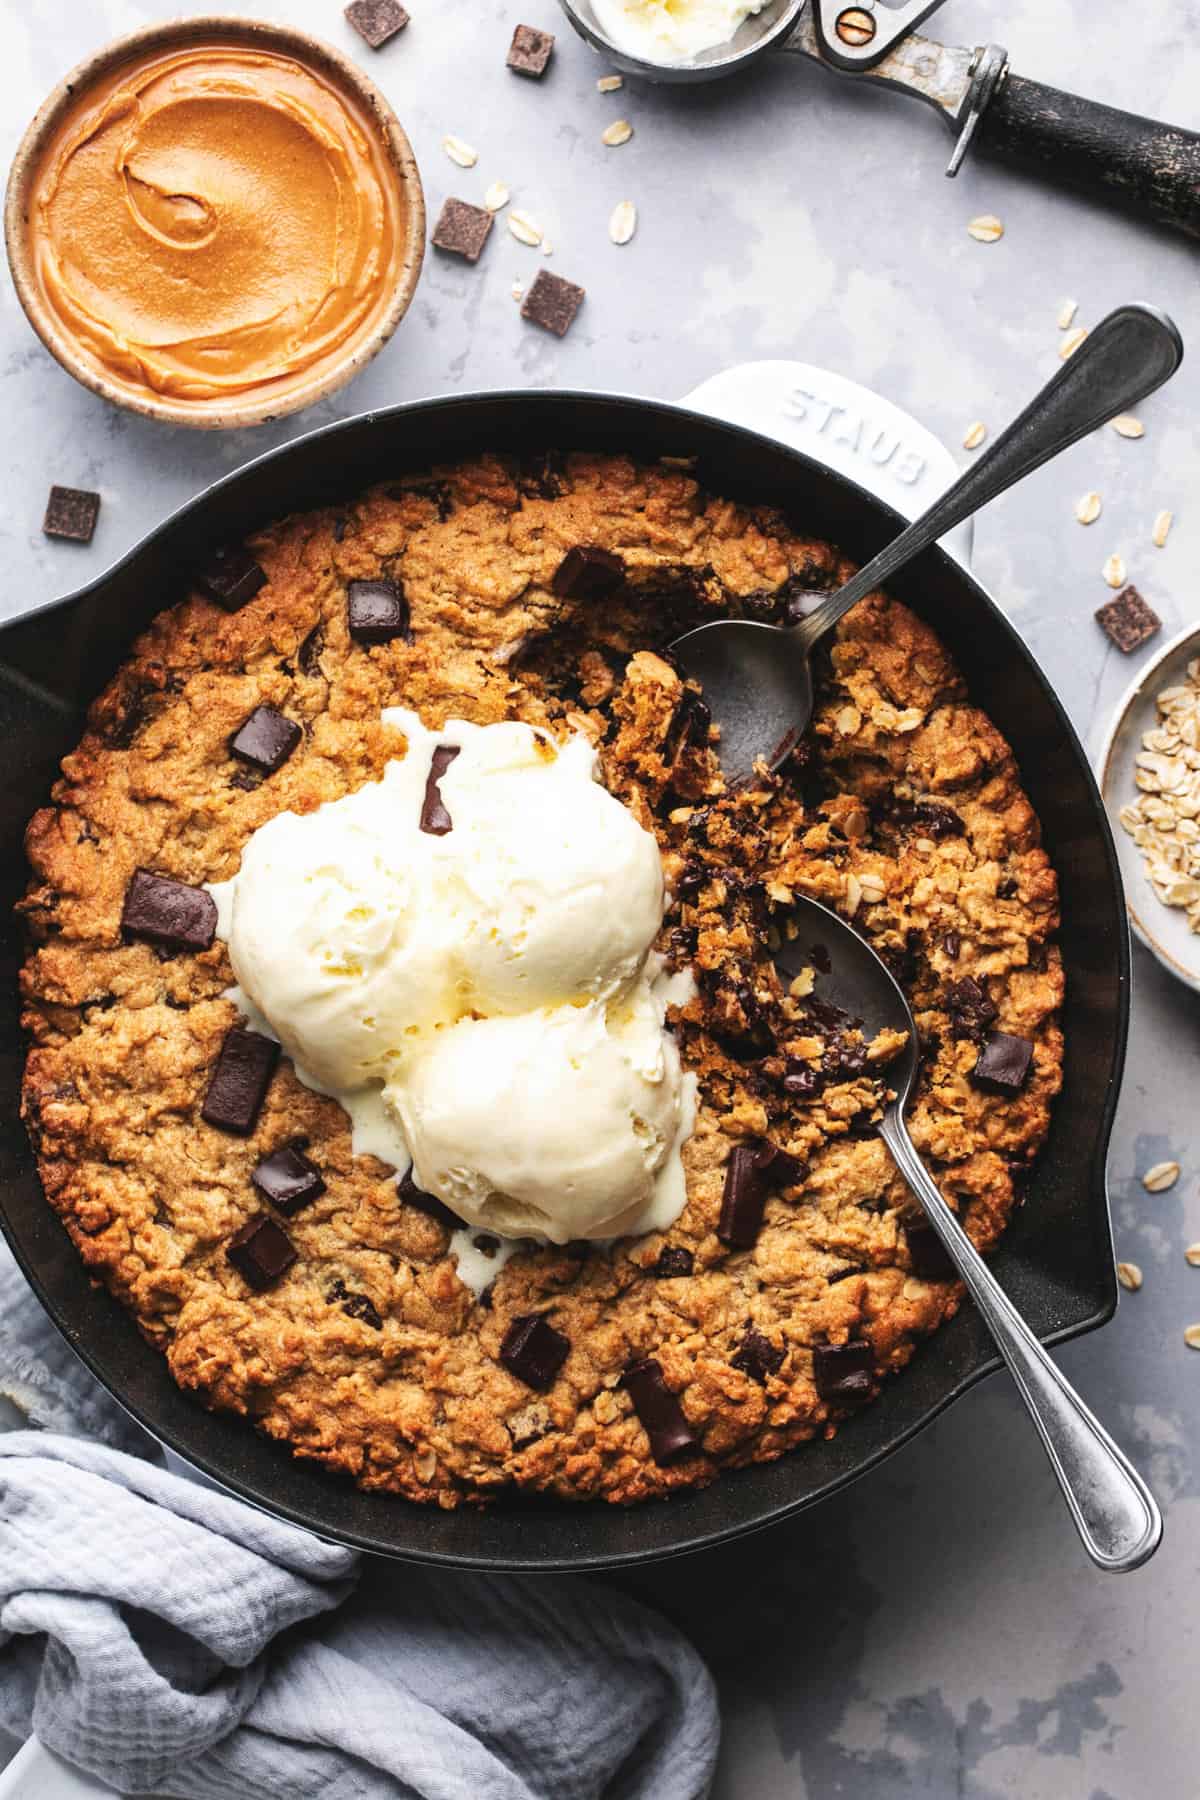 baked skillet cookie with two spoons and ice cream